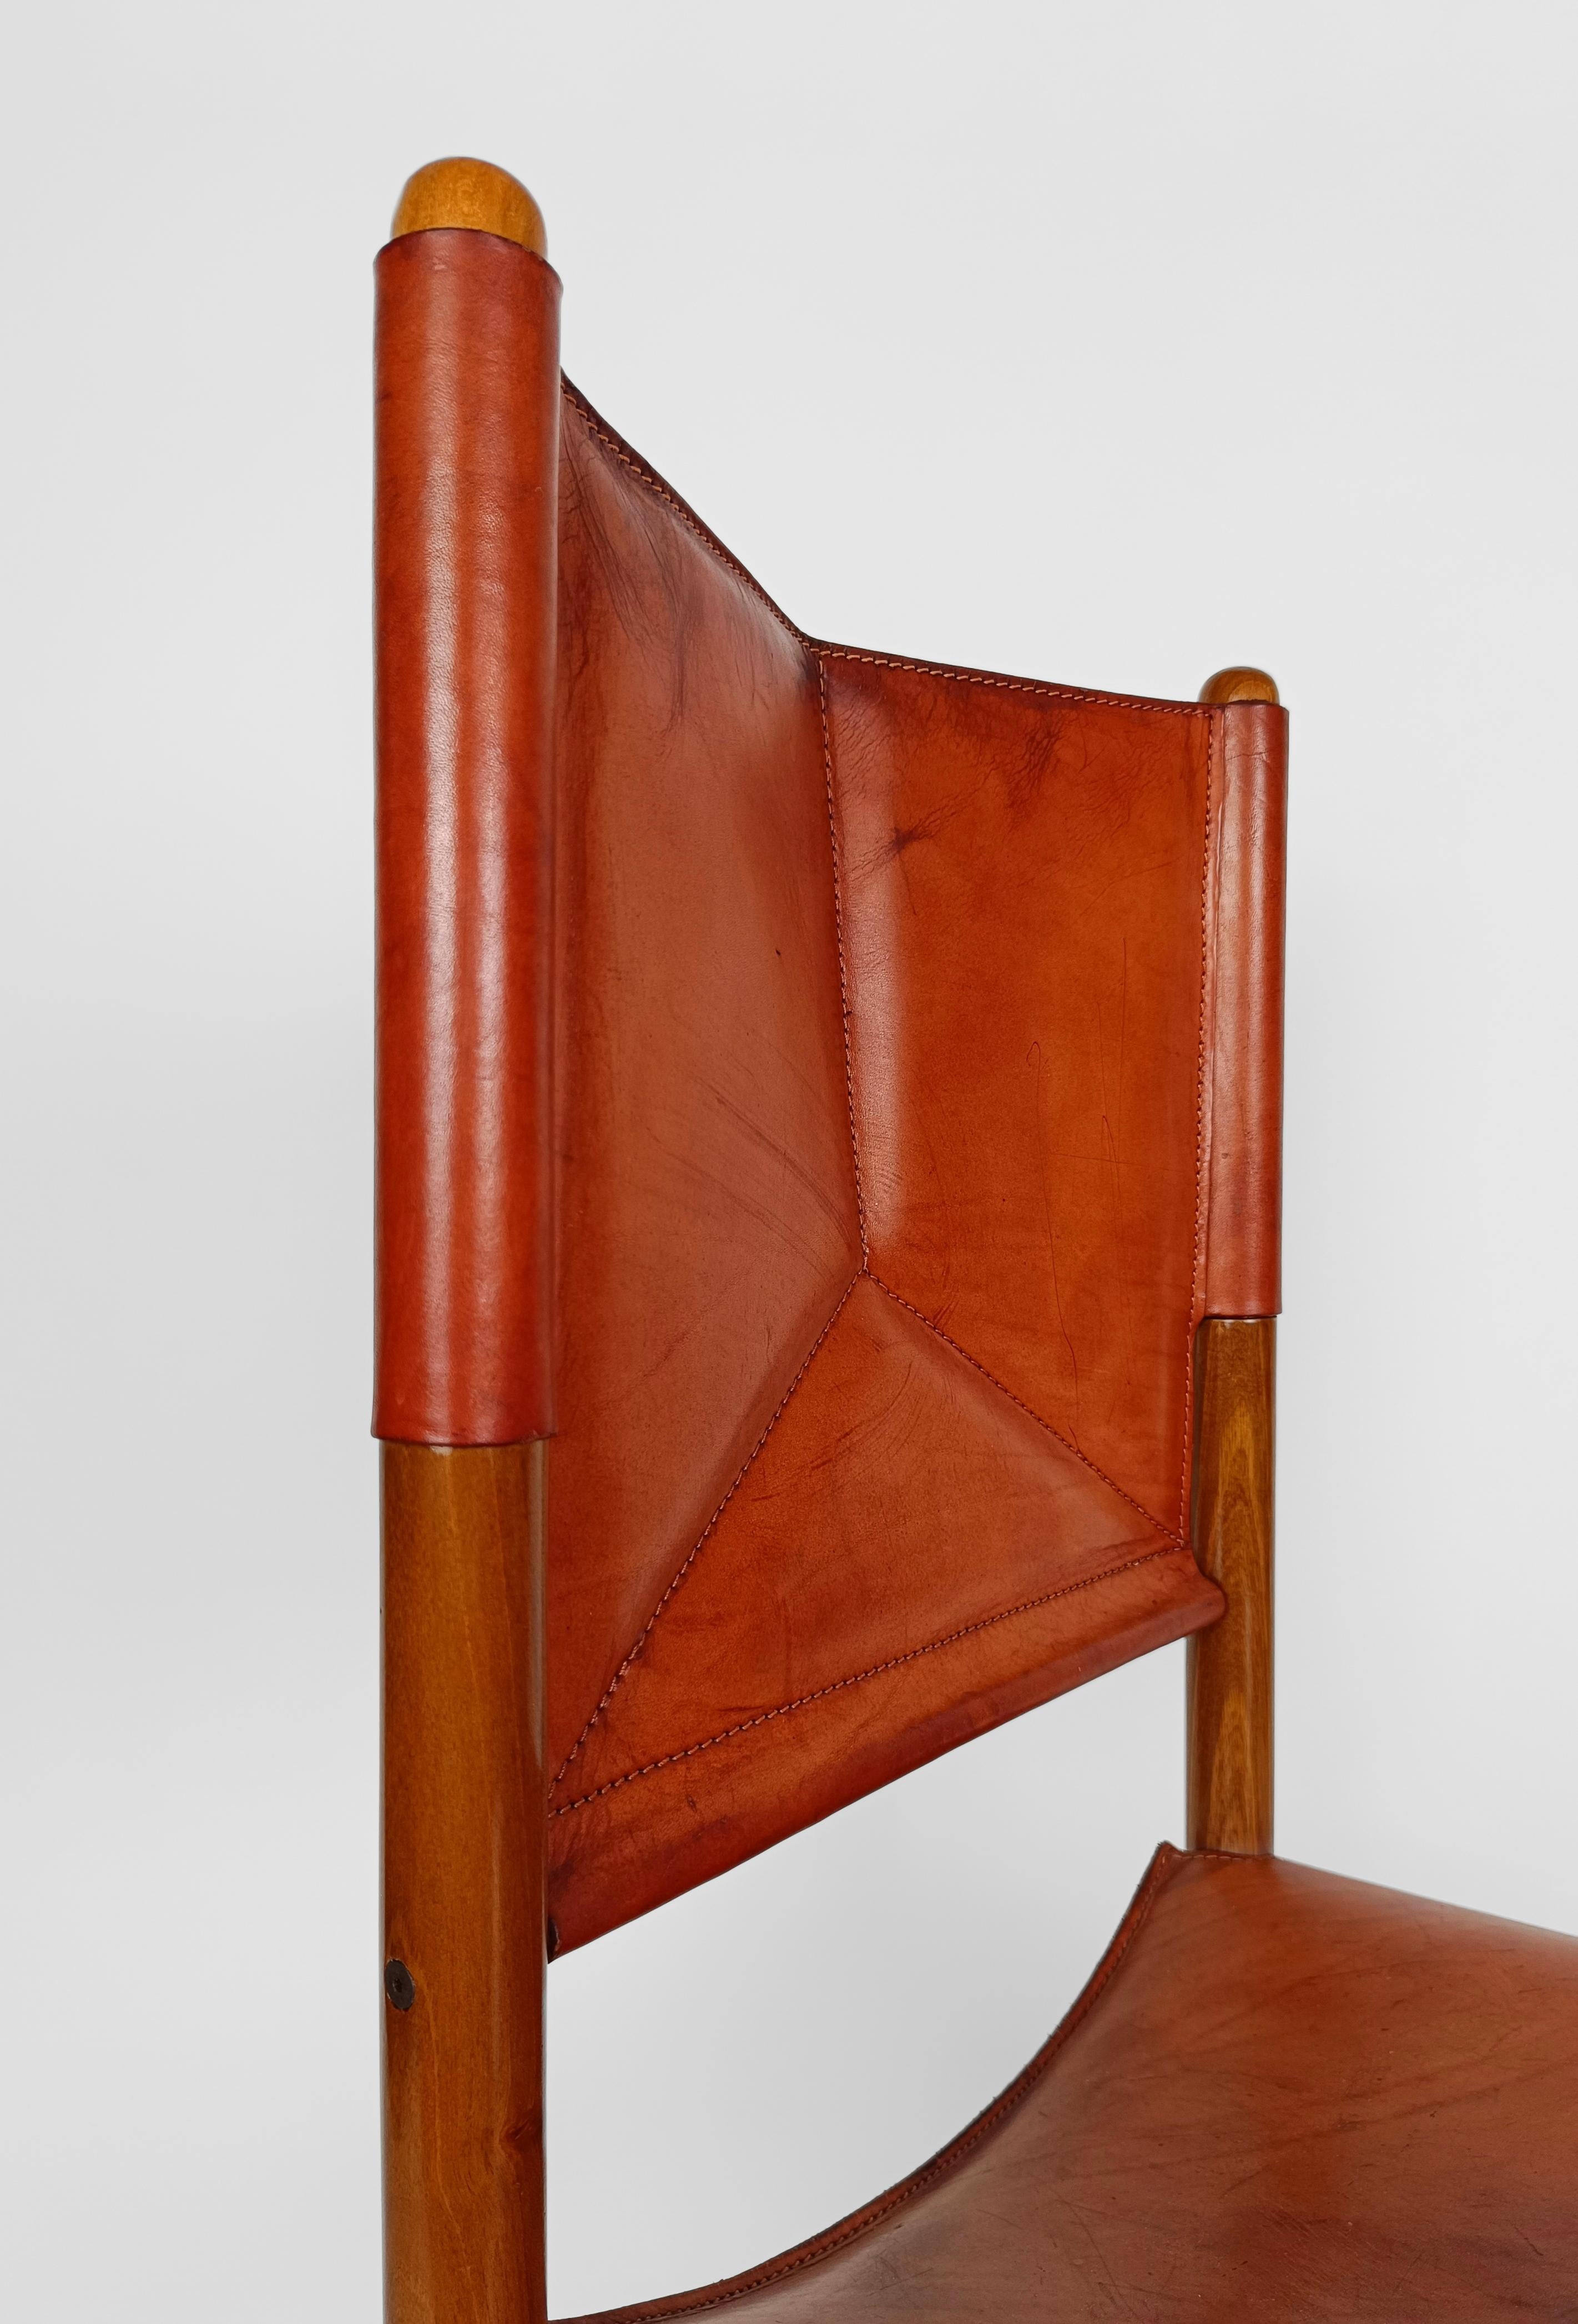 A set made up of a really rare number to find when it comes to vintage chairs, 8 chairs of the highest Italian quality made of solid ash wood and stitched leather.
Produced in the area of ​​excellence of the Italian furniture factories, Cantù, in